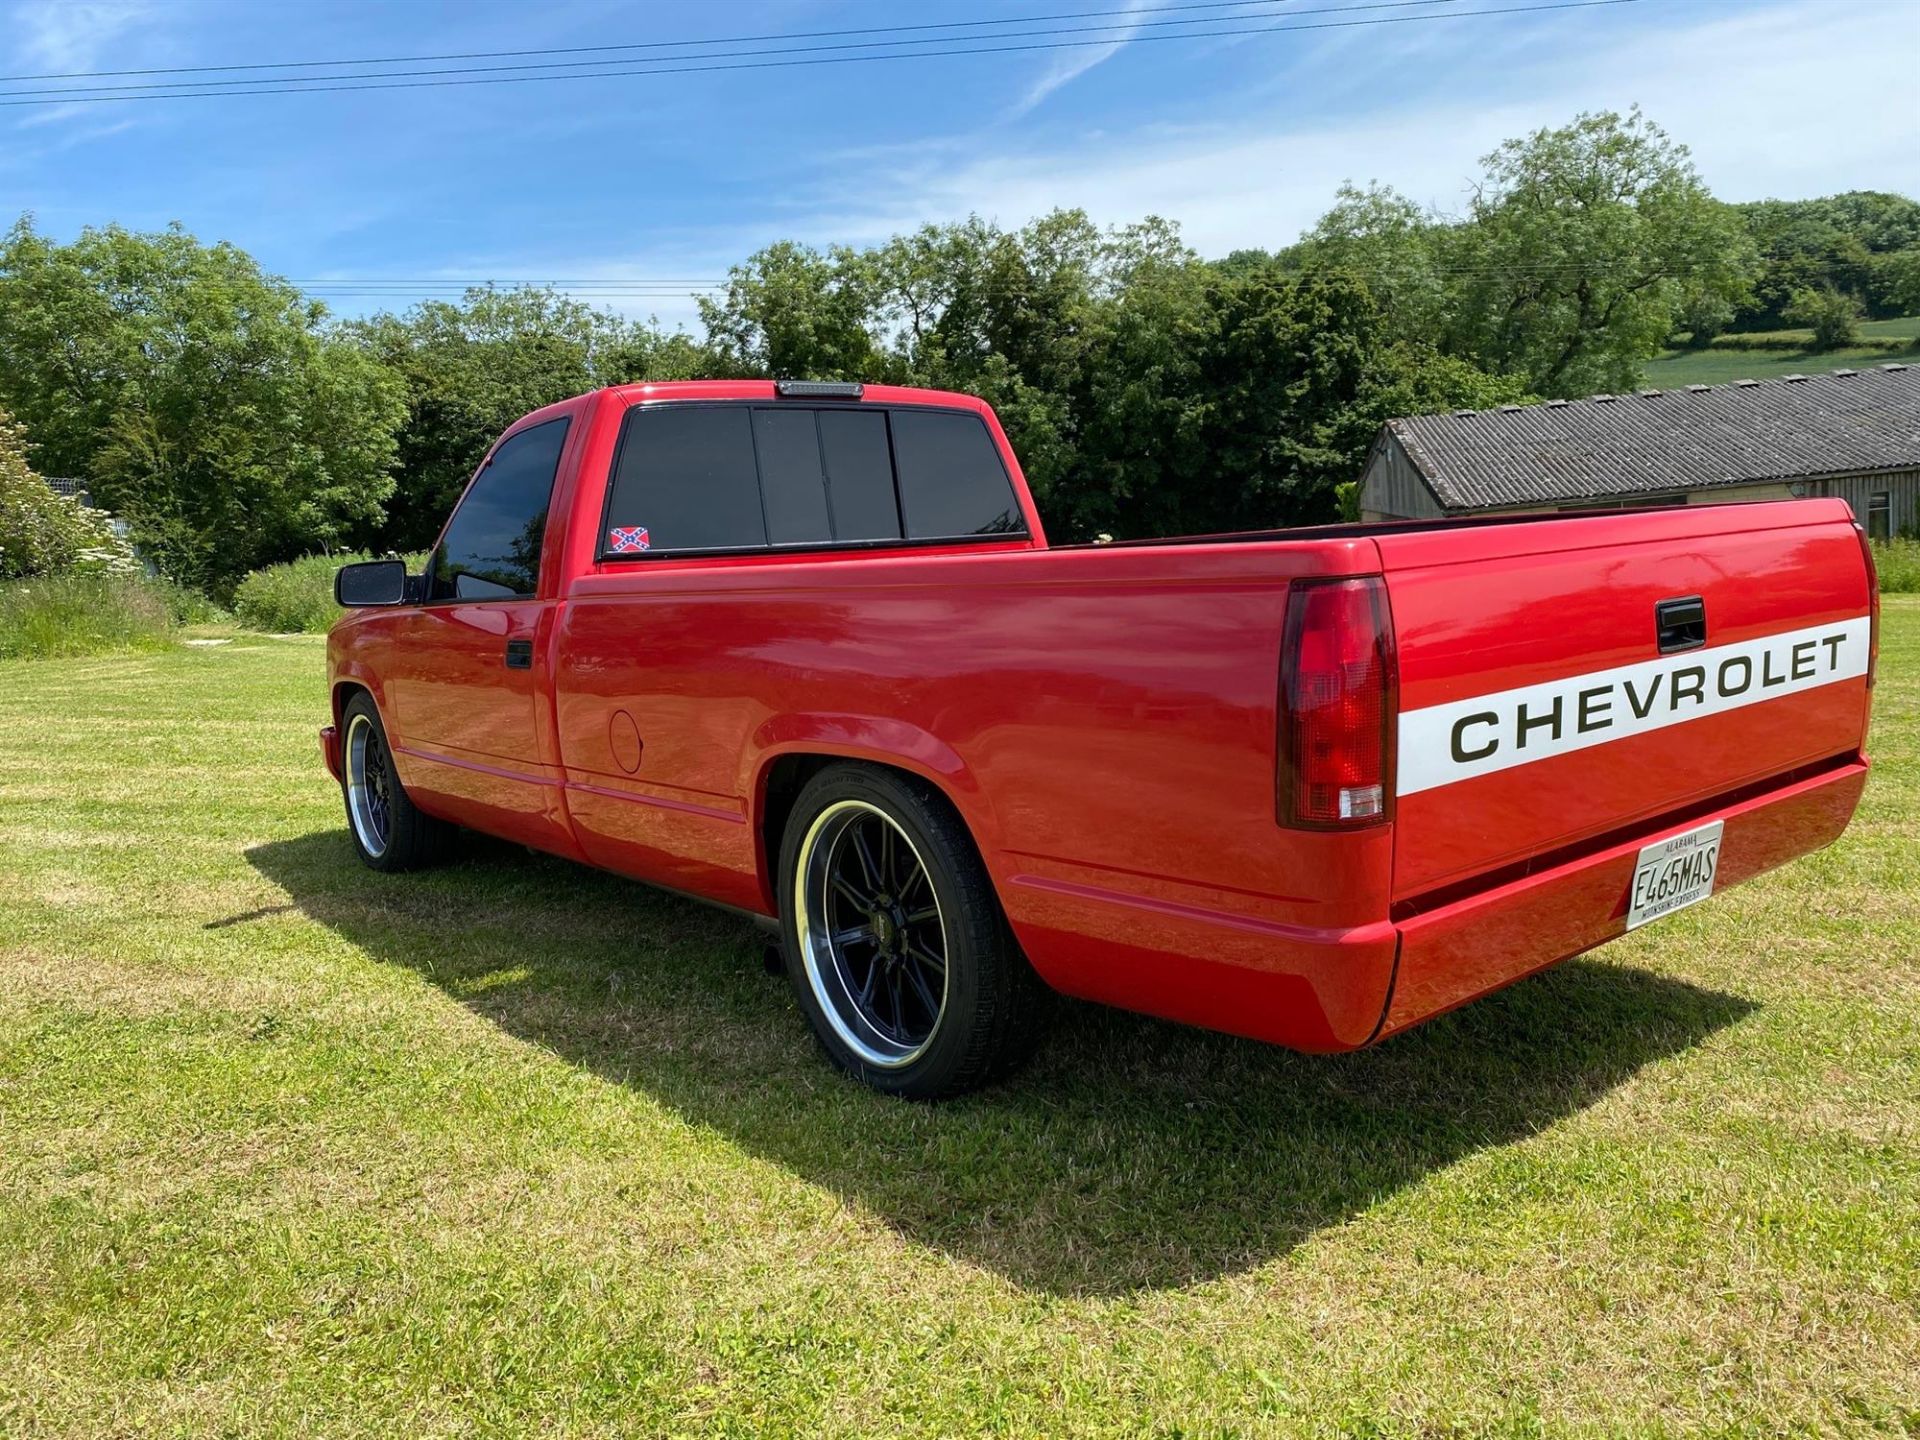 1988 Chevrolet C1500/OBS/GMT-400 Pickup - Image 7 of 10